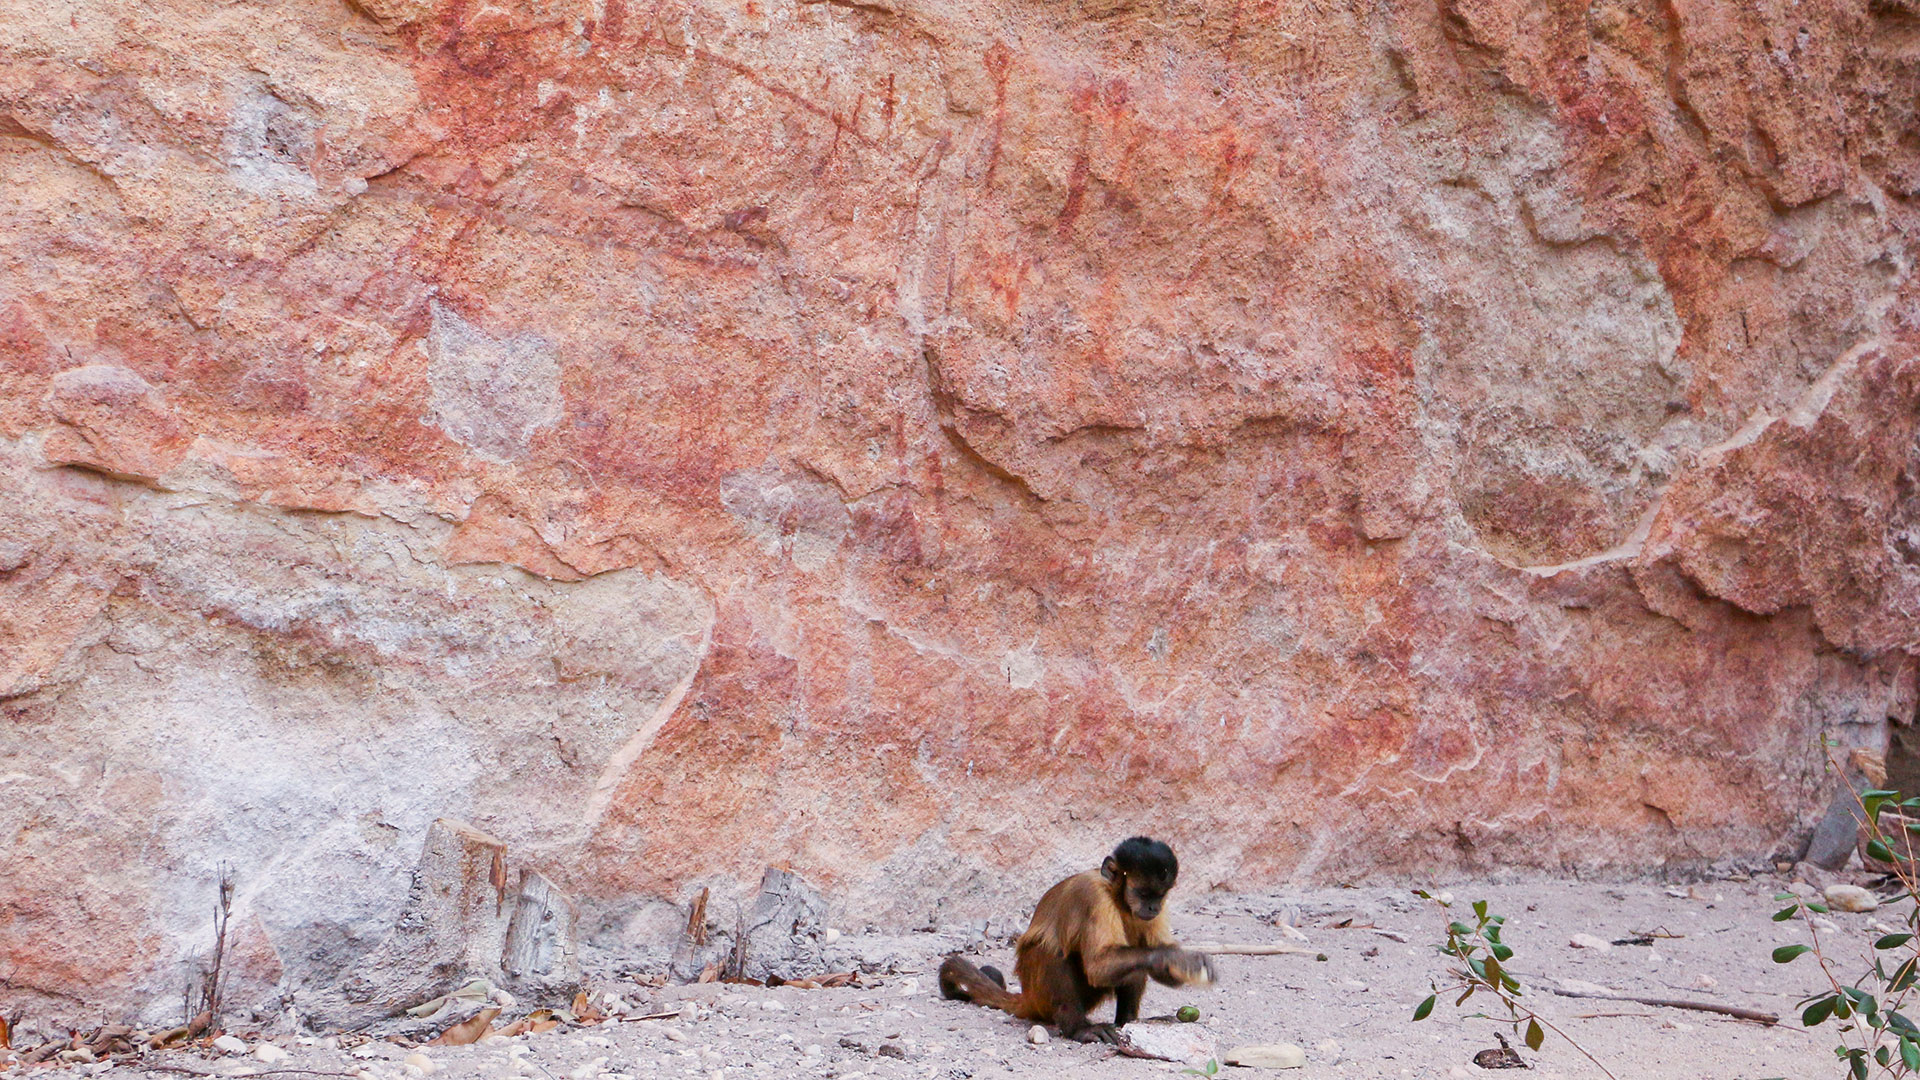 A capuchin monkey breaks fruit using a stone as a hammer and another as an anvil at an archaeological site with rock paintings in northeastern Brazil/Tiago Falótico.